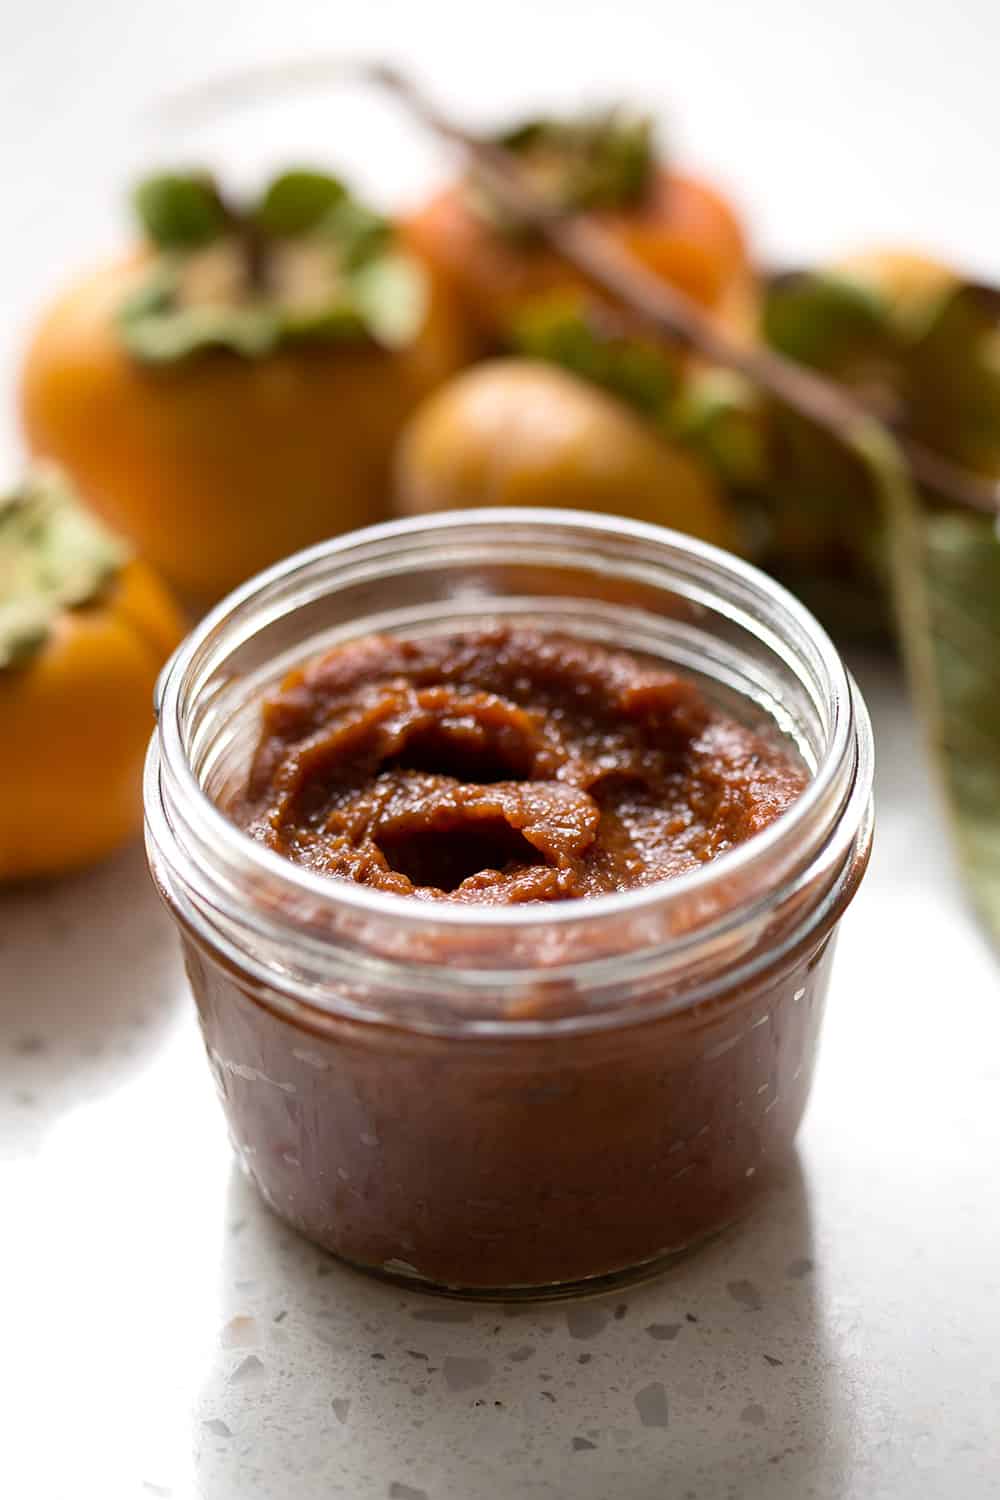 Persimmon season is a short one but I encourage you to scoop them up and make this Spiced Persimmon Butter. It’s similar to pumpkin or apple butter but made with persimmons and some extra spices for those yummy fall and winter flavors. This recipe is allergy friendly (gluten, dairy, shellfish, nut, egg, and soy free) and suits the paleo diets